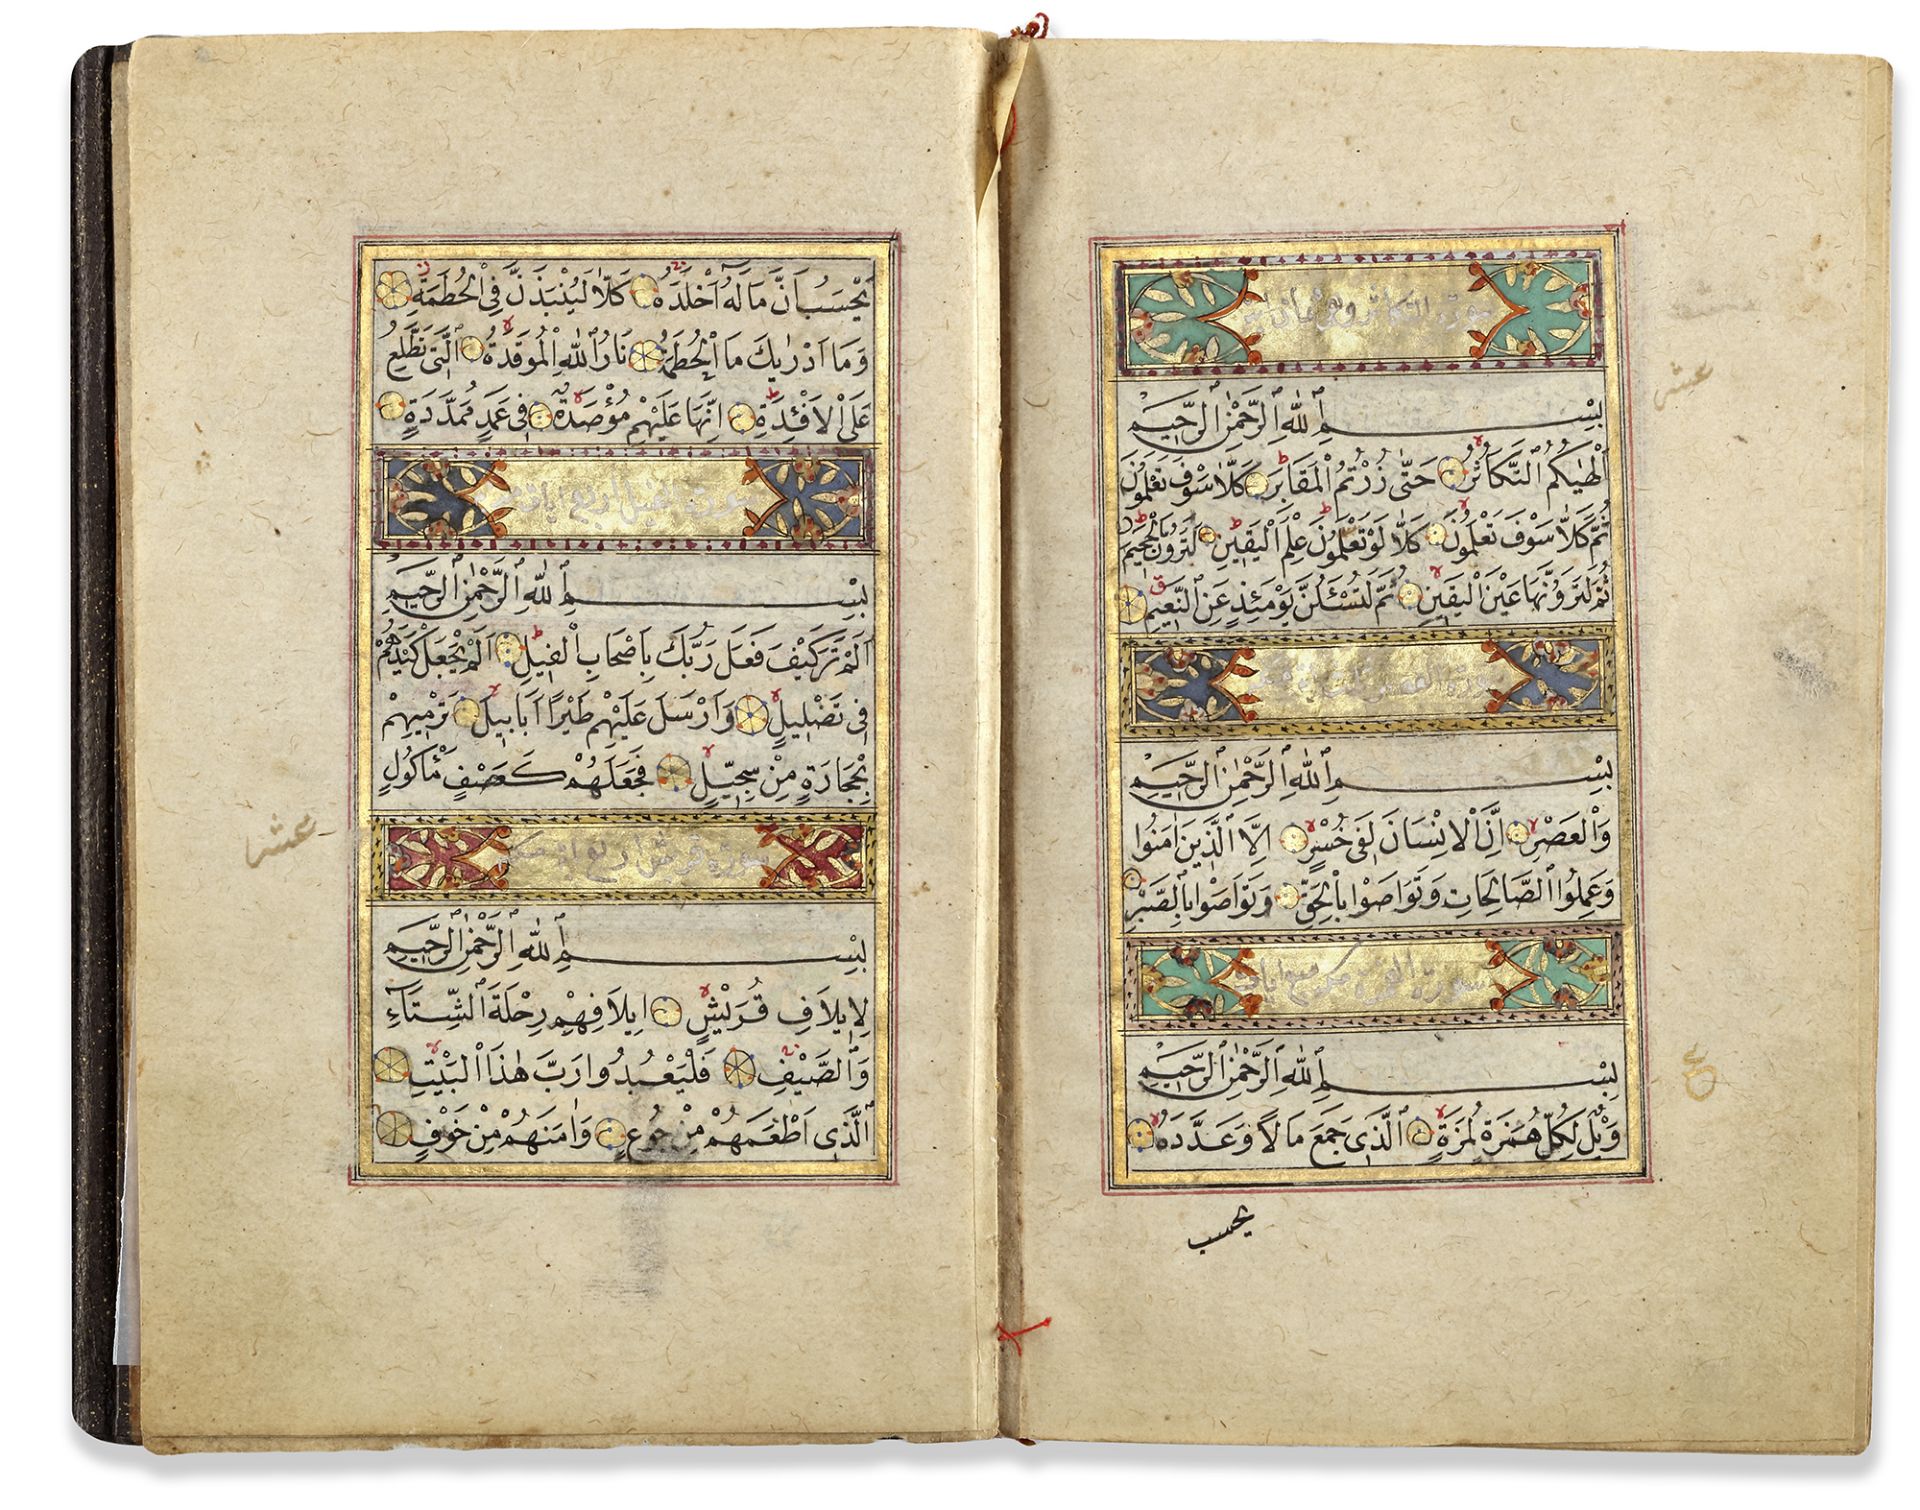 AN OTTOMAN QURAN SIGNED HOCAZADE MEHMED ENVERI, OTTOMAN TURKEY, DATED 1102 AH/1690 AD - Image 4 of 6